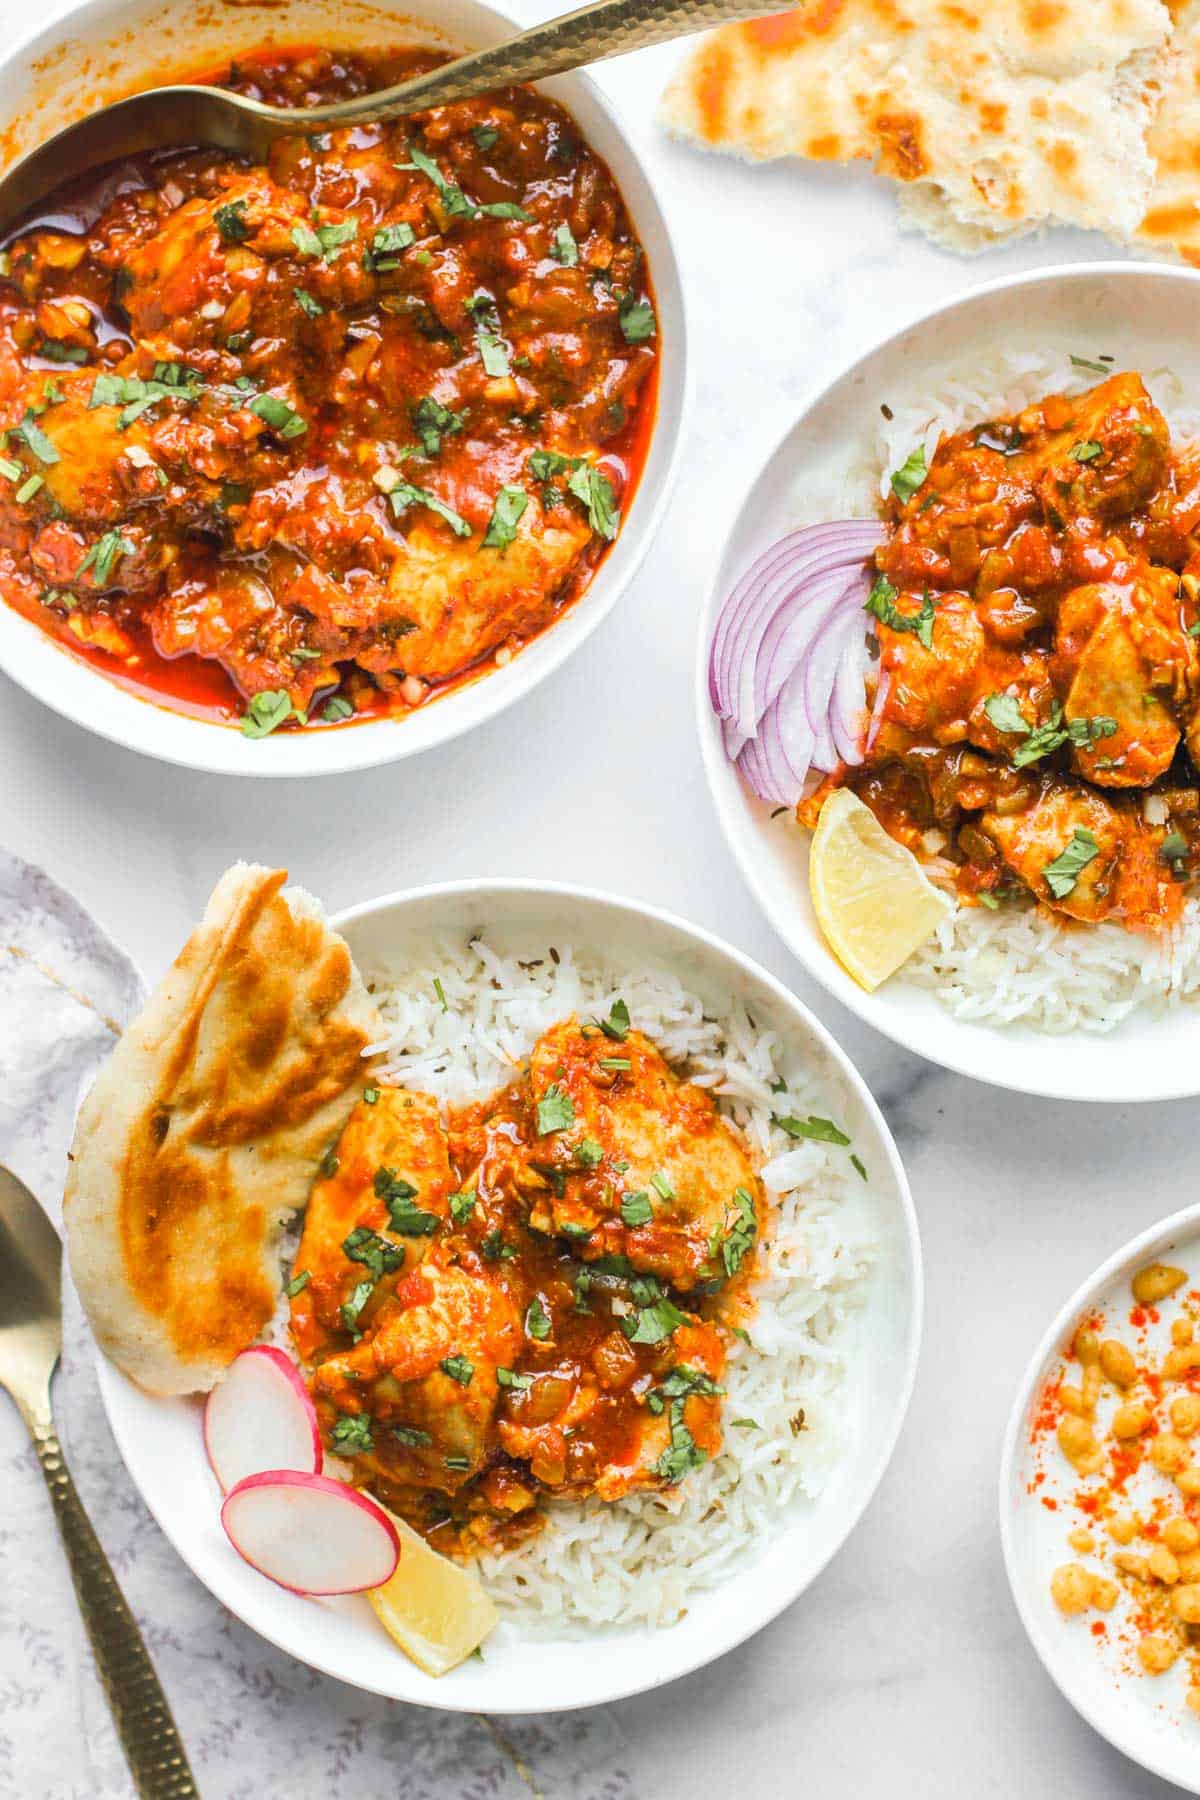 Chicken Karahi - Instant Pot & Stove Top Recipe - Ministry of Curry